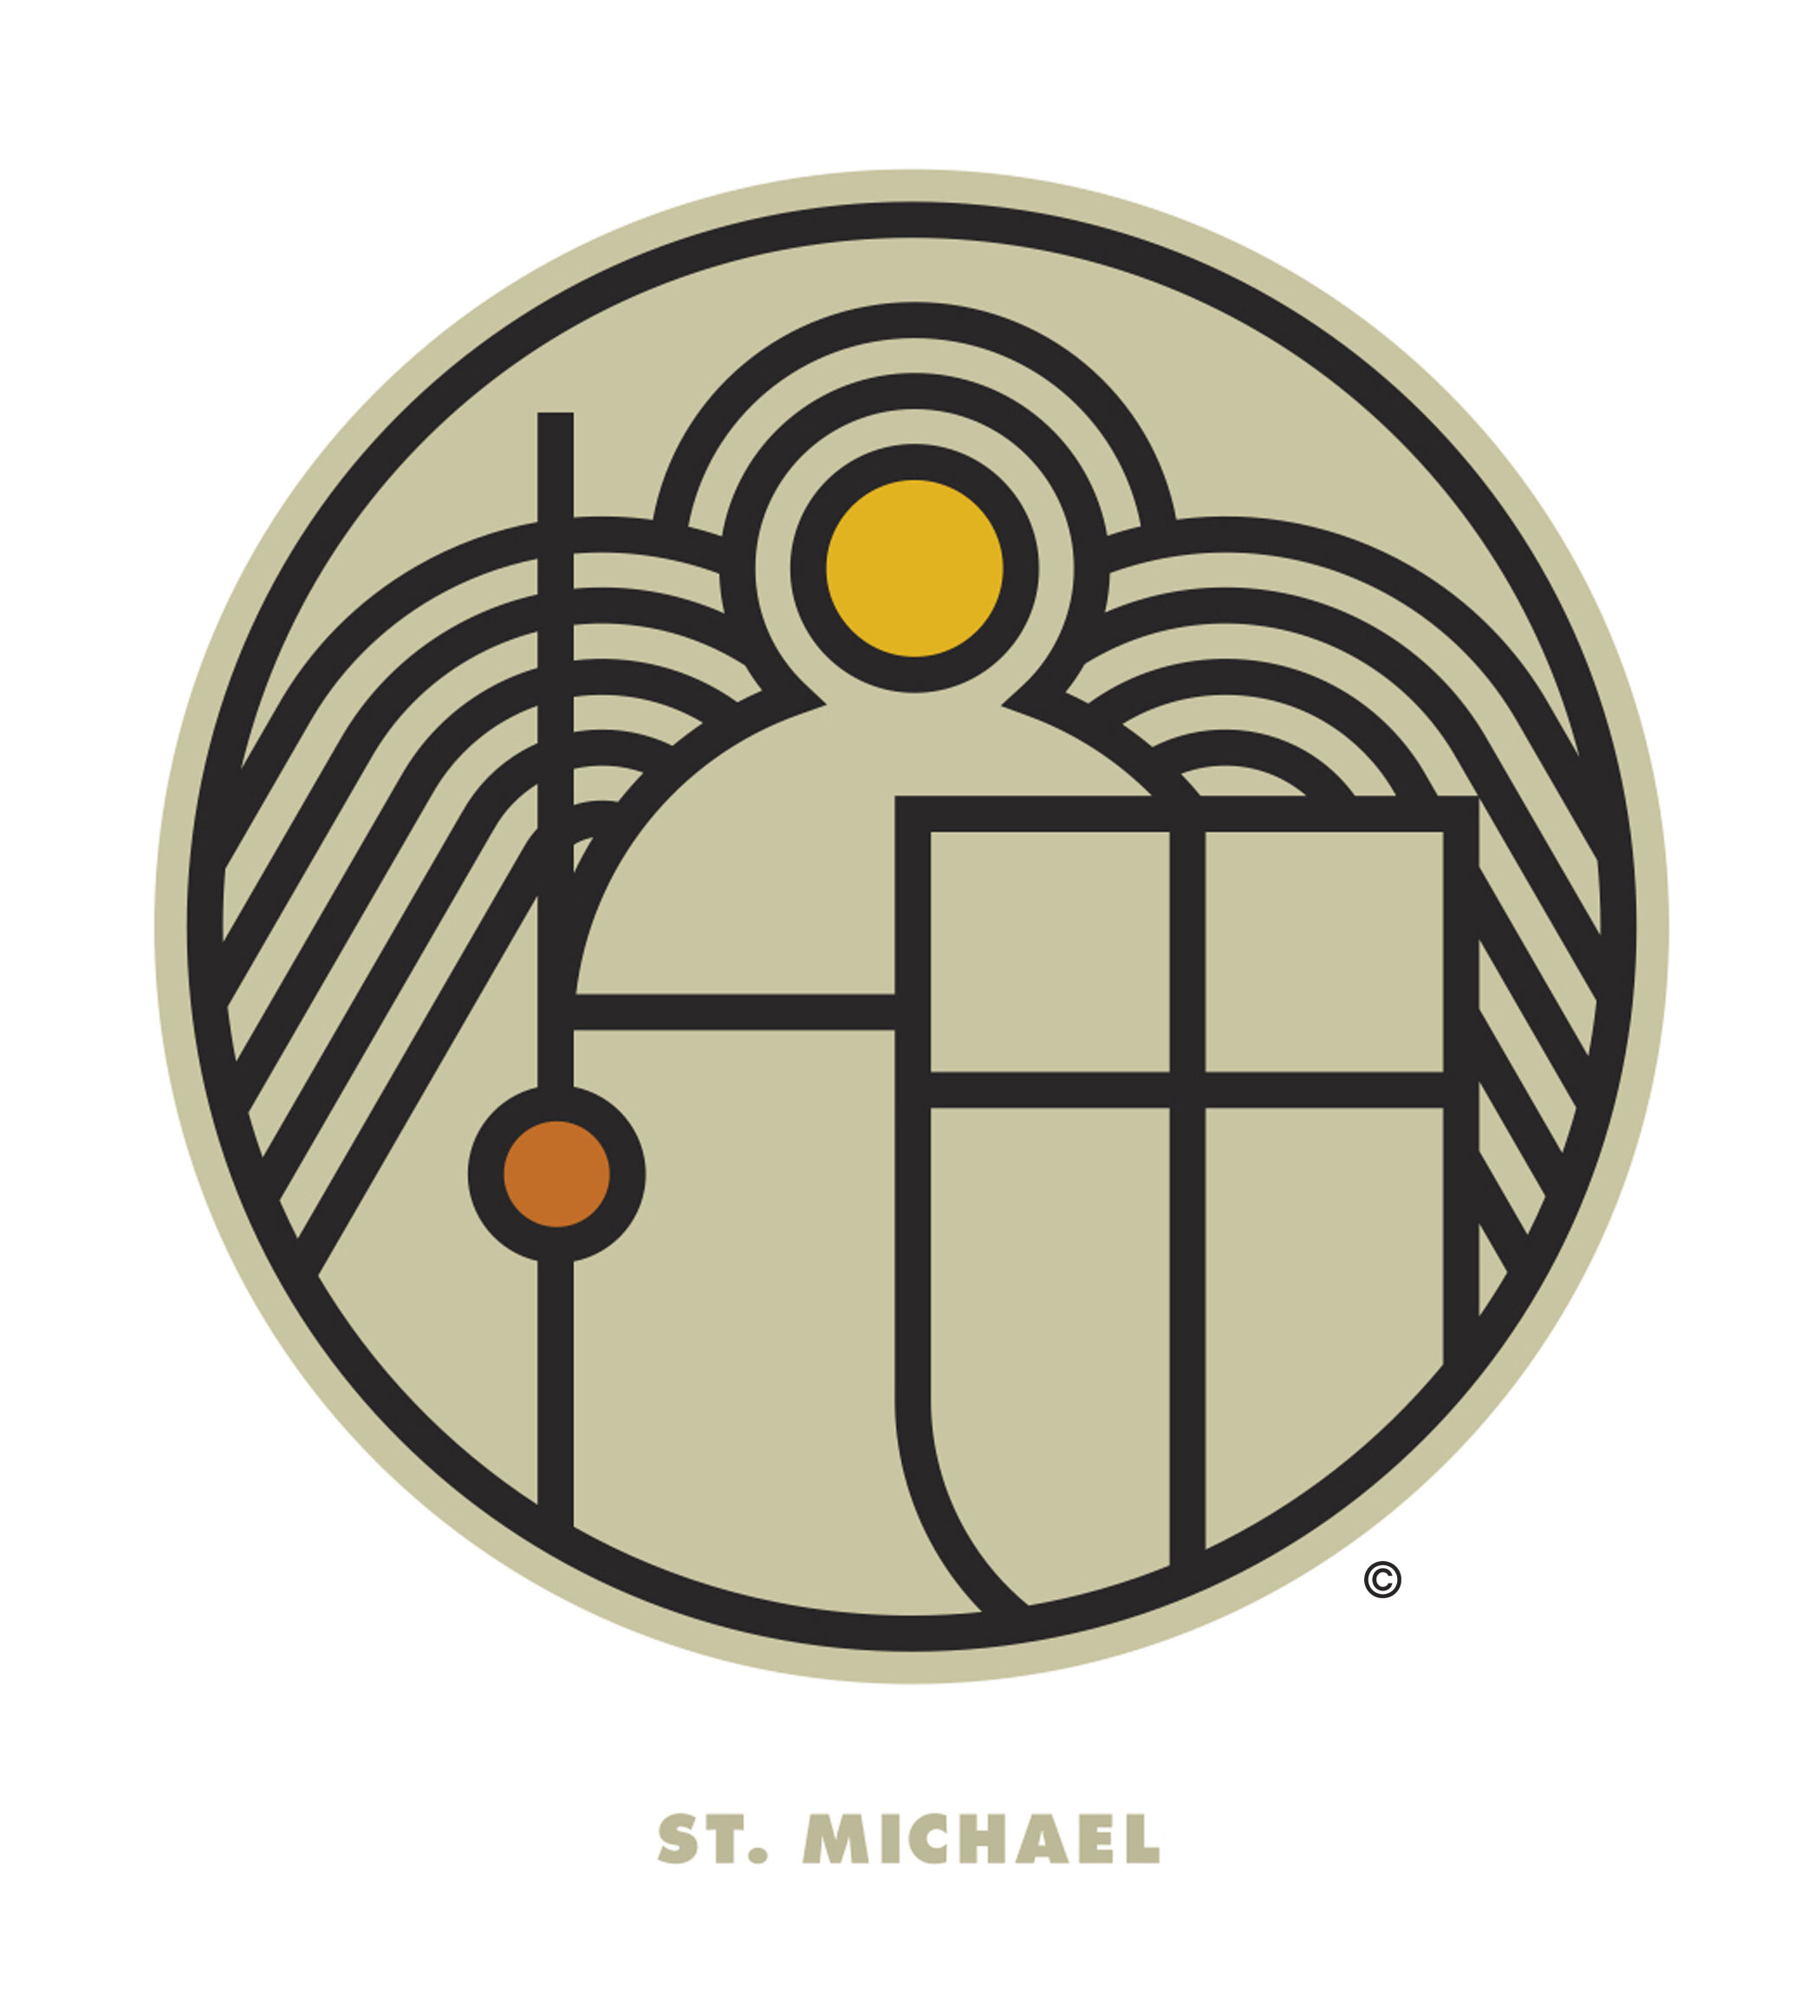  St. Michael  Design creative by Chuck Mitchell  © Chuck Mitchell  All rights reserved. 